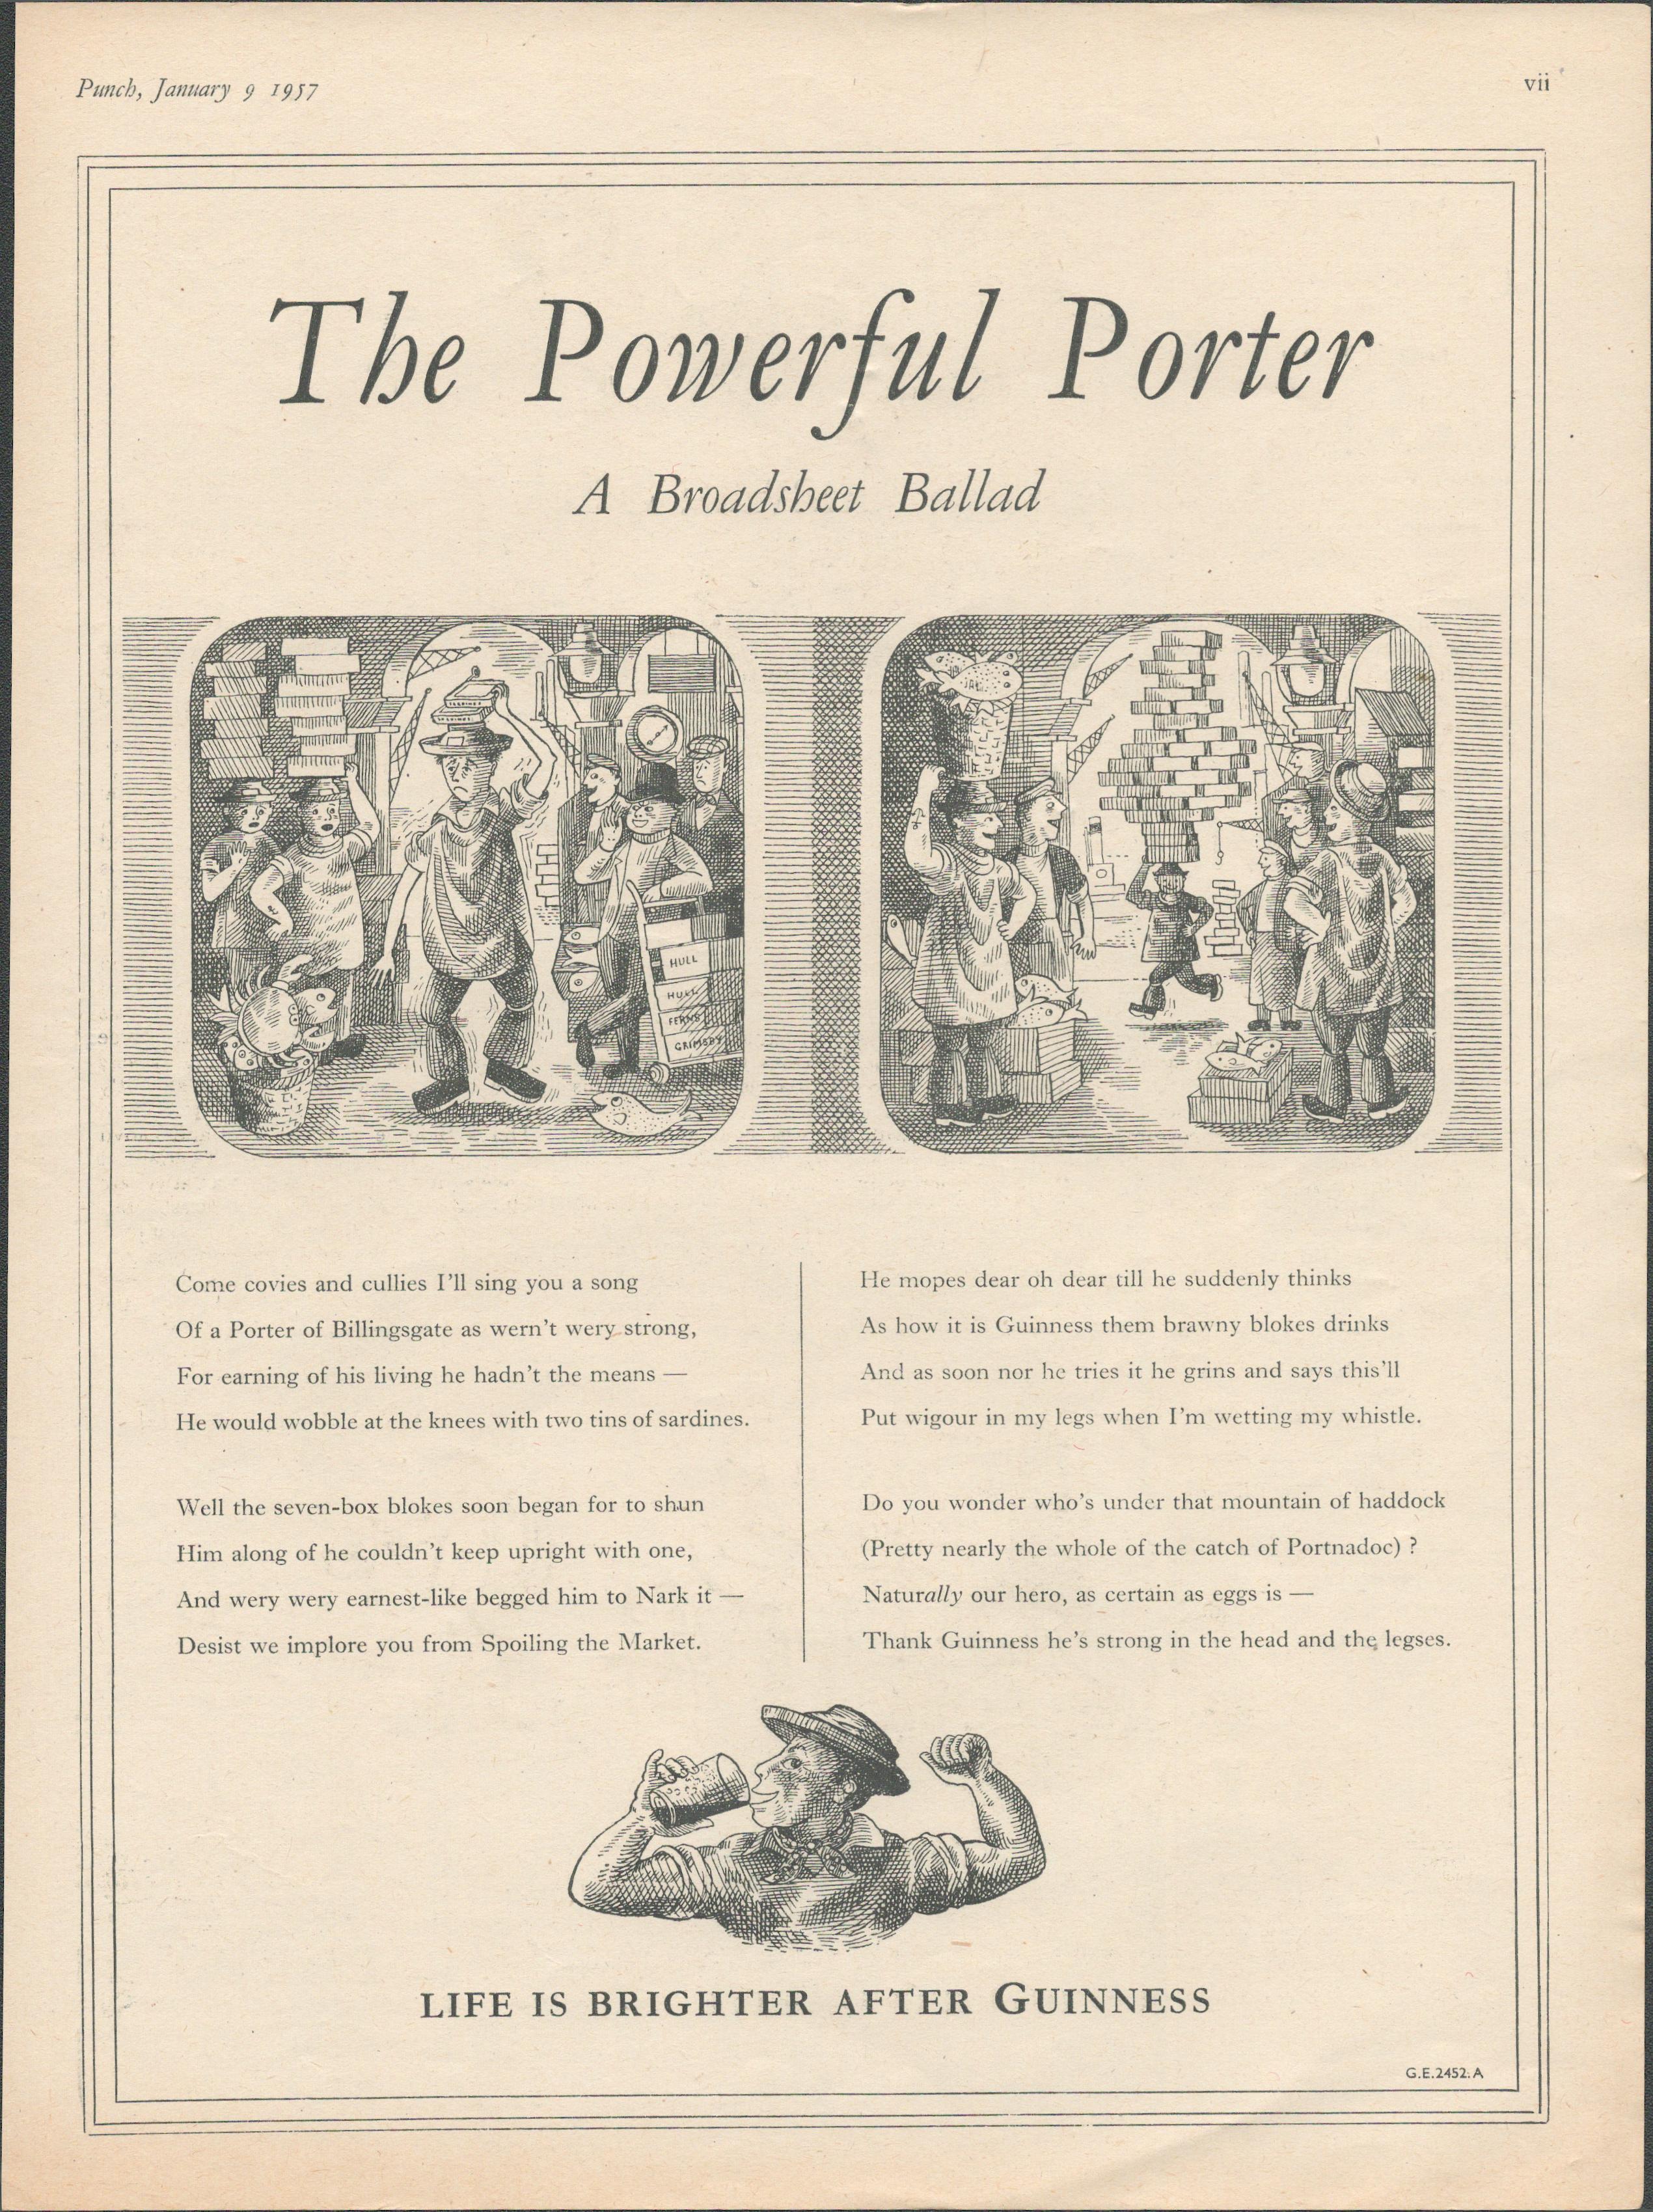 1957 Guinness Print The Powerful Porter'-GE.2452.A